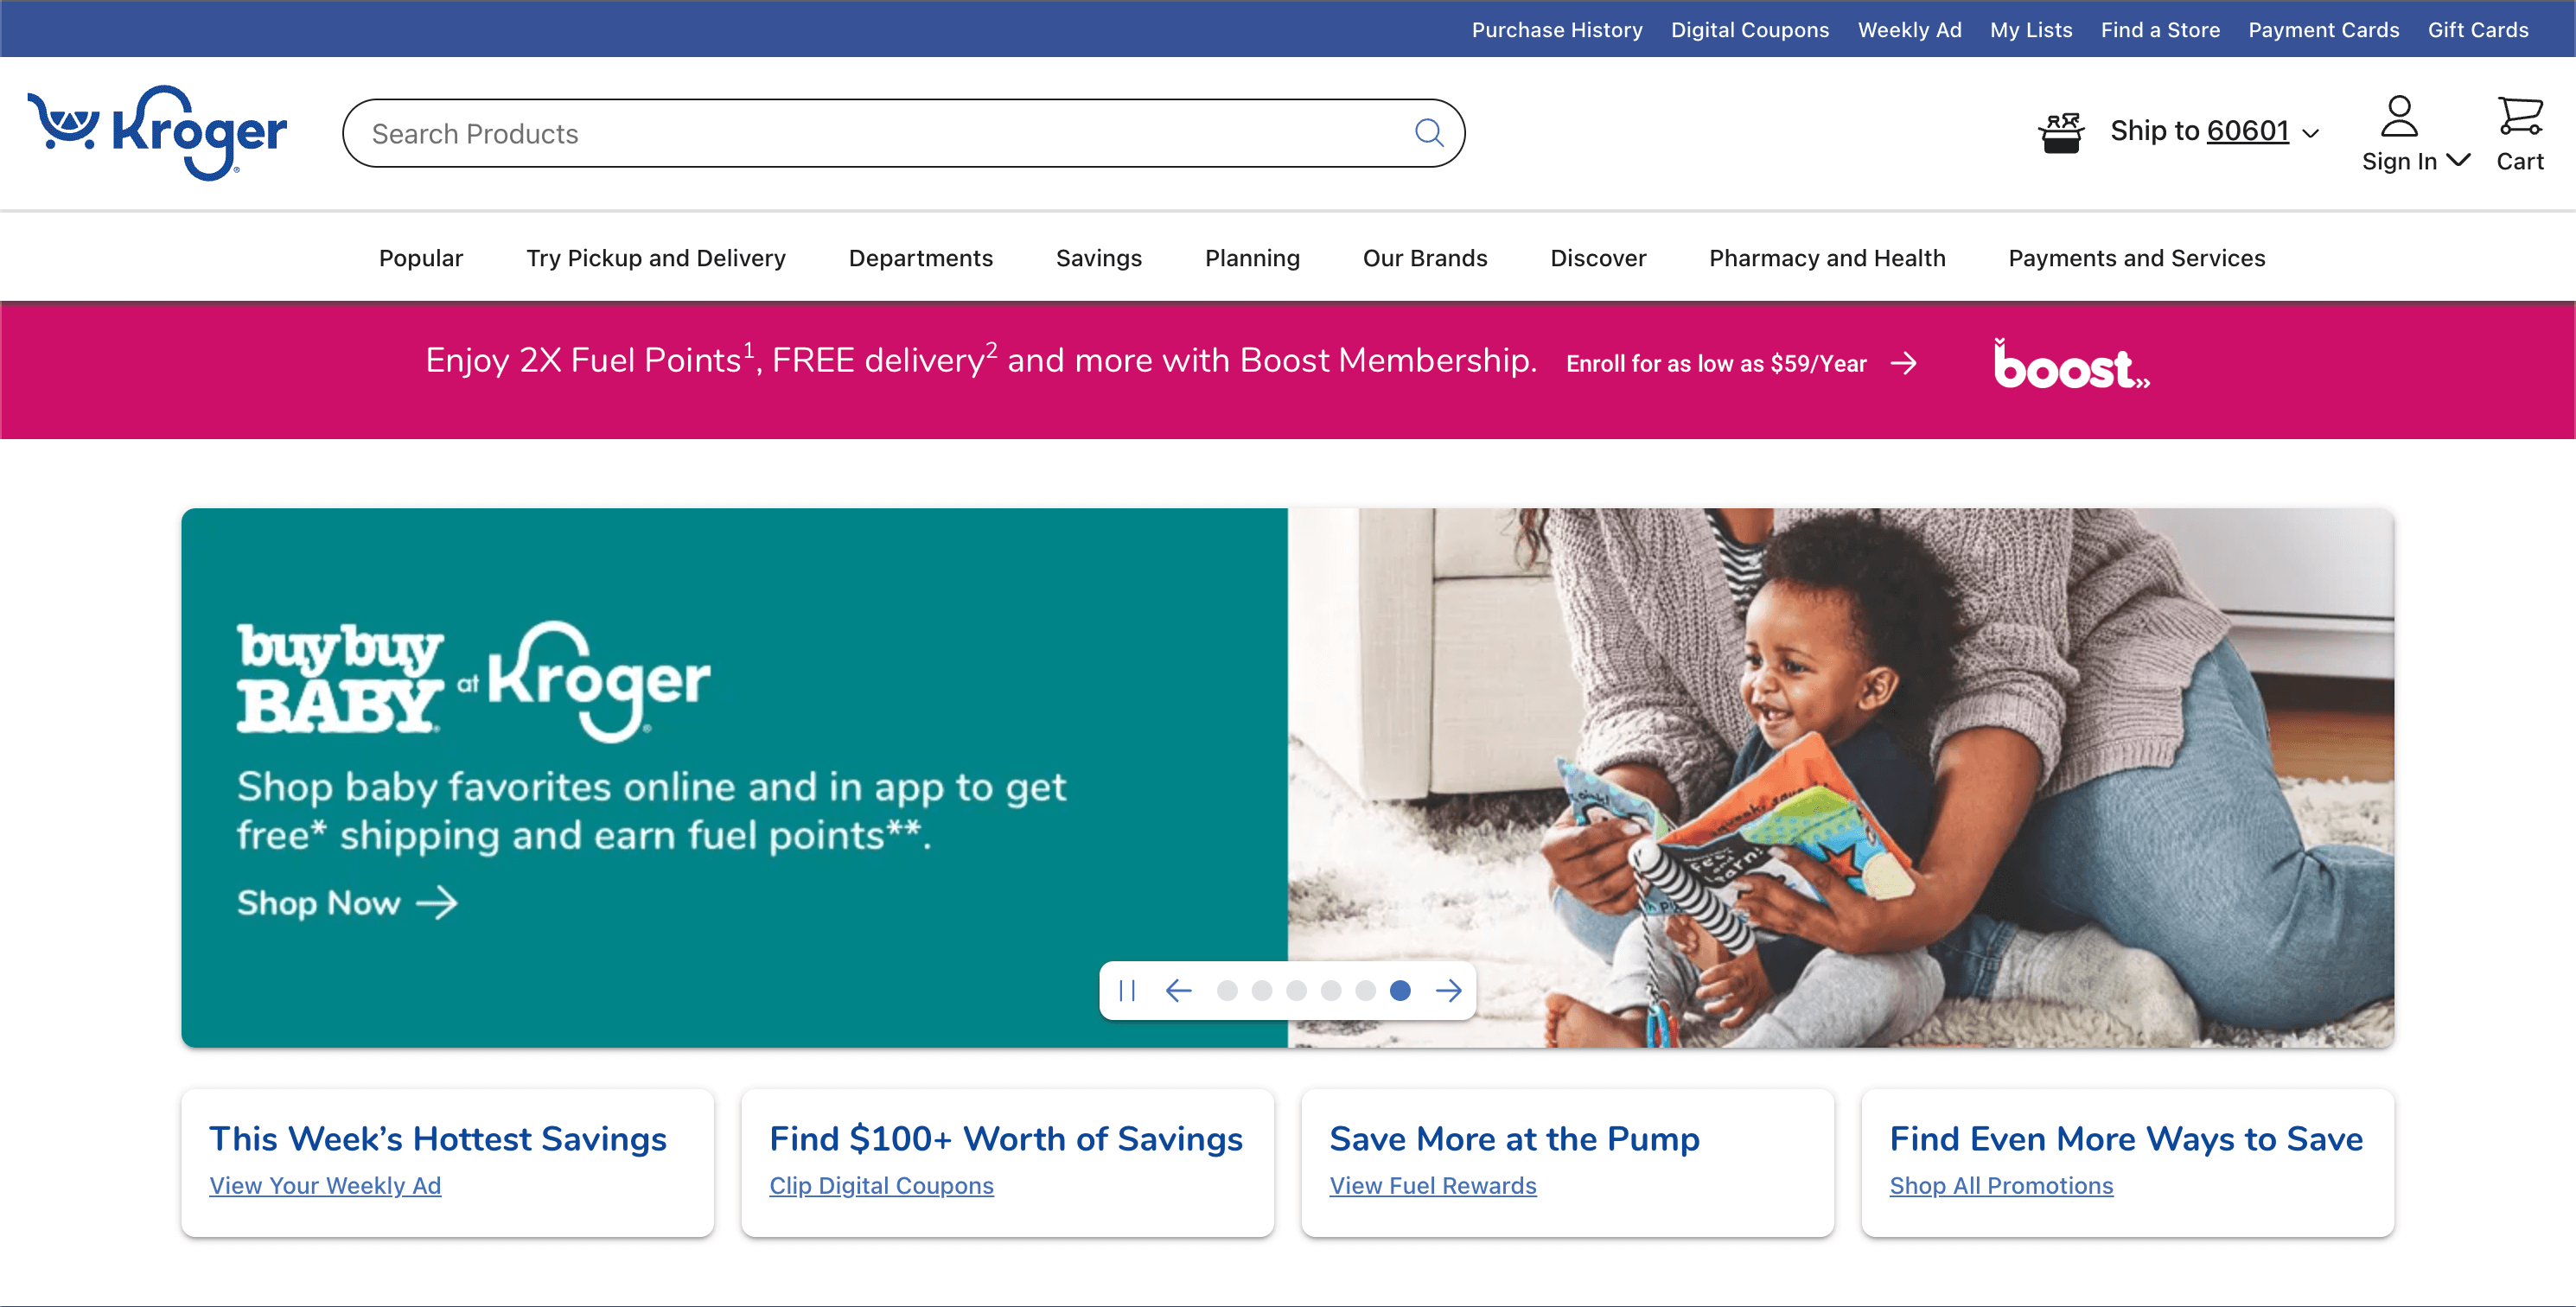 Kroger's home page